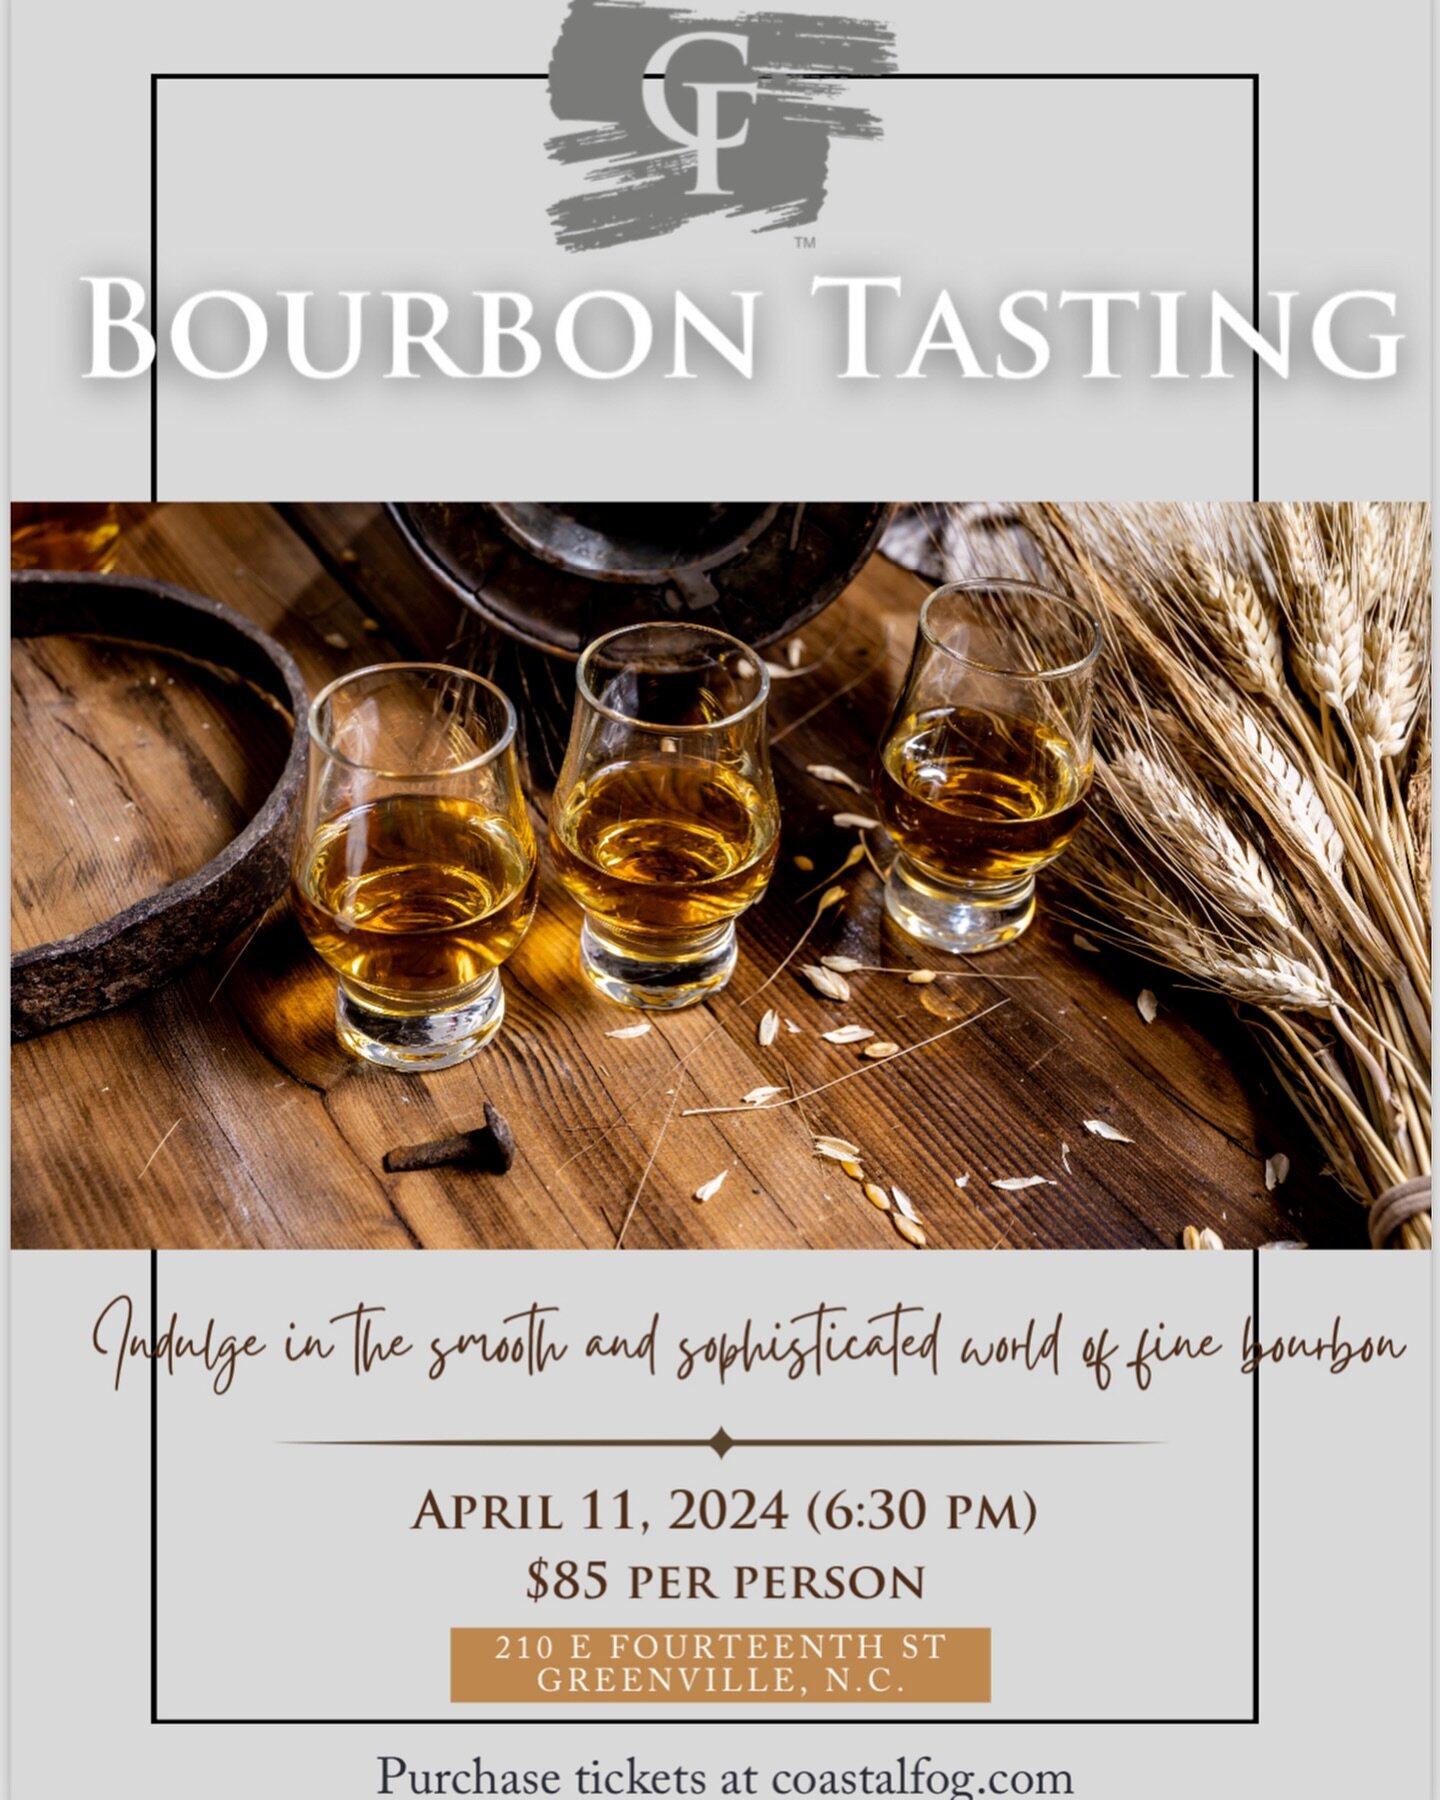 Tickets available with link in bio. You must attend this bourbon tasting at Coastal Fog! It is the best combination of exploring, discussing and savoring the tastes of top quality spirits. Wine and other drinks available as well if a partner wants to